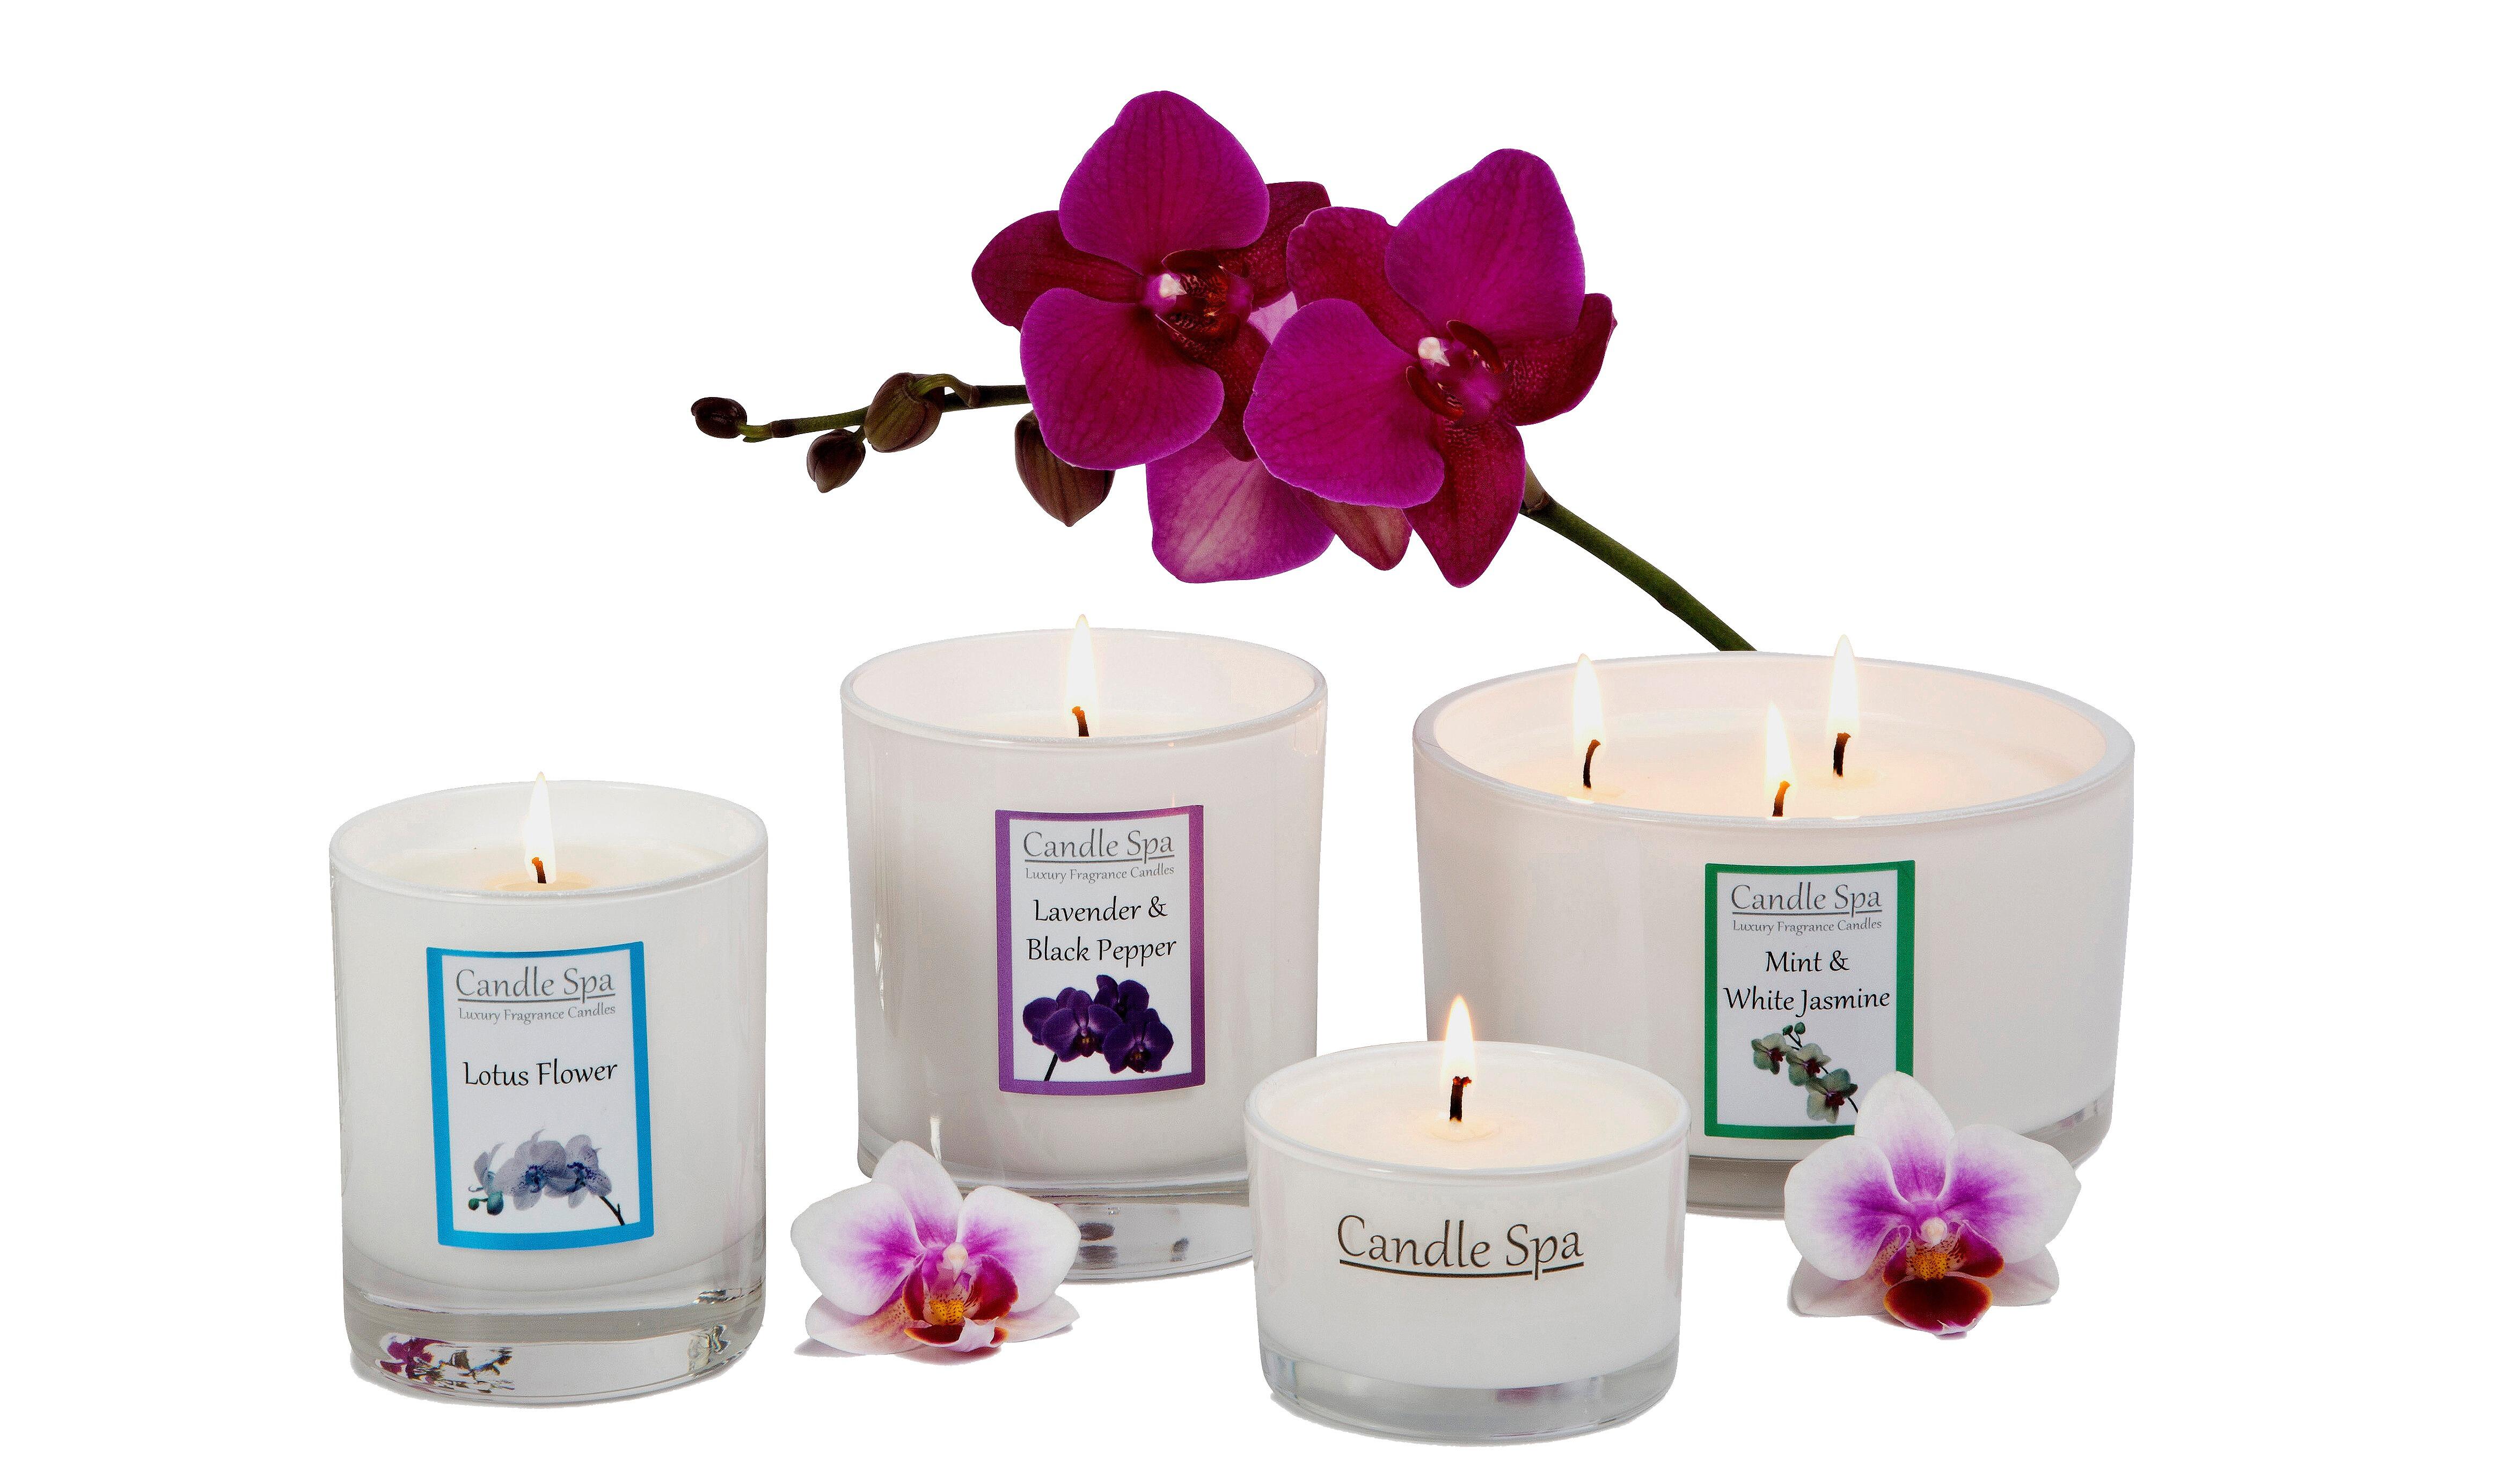 Candle Spa's range of scented candles